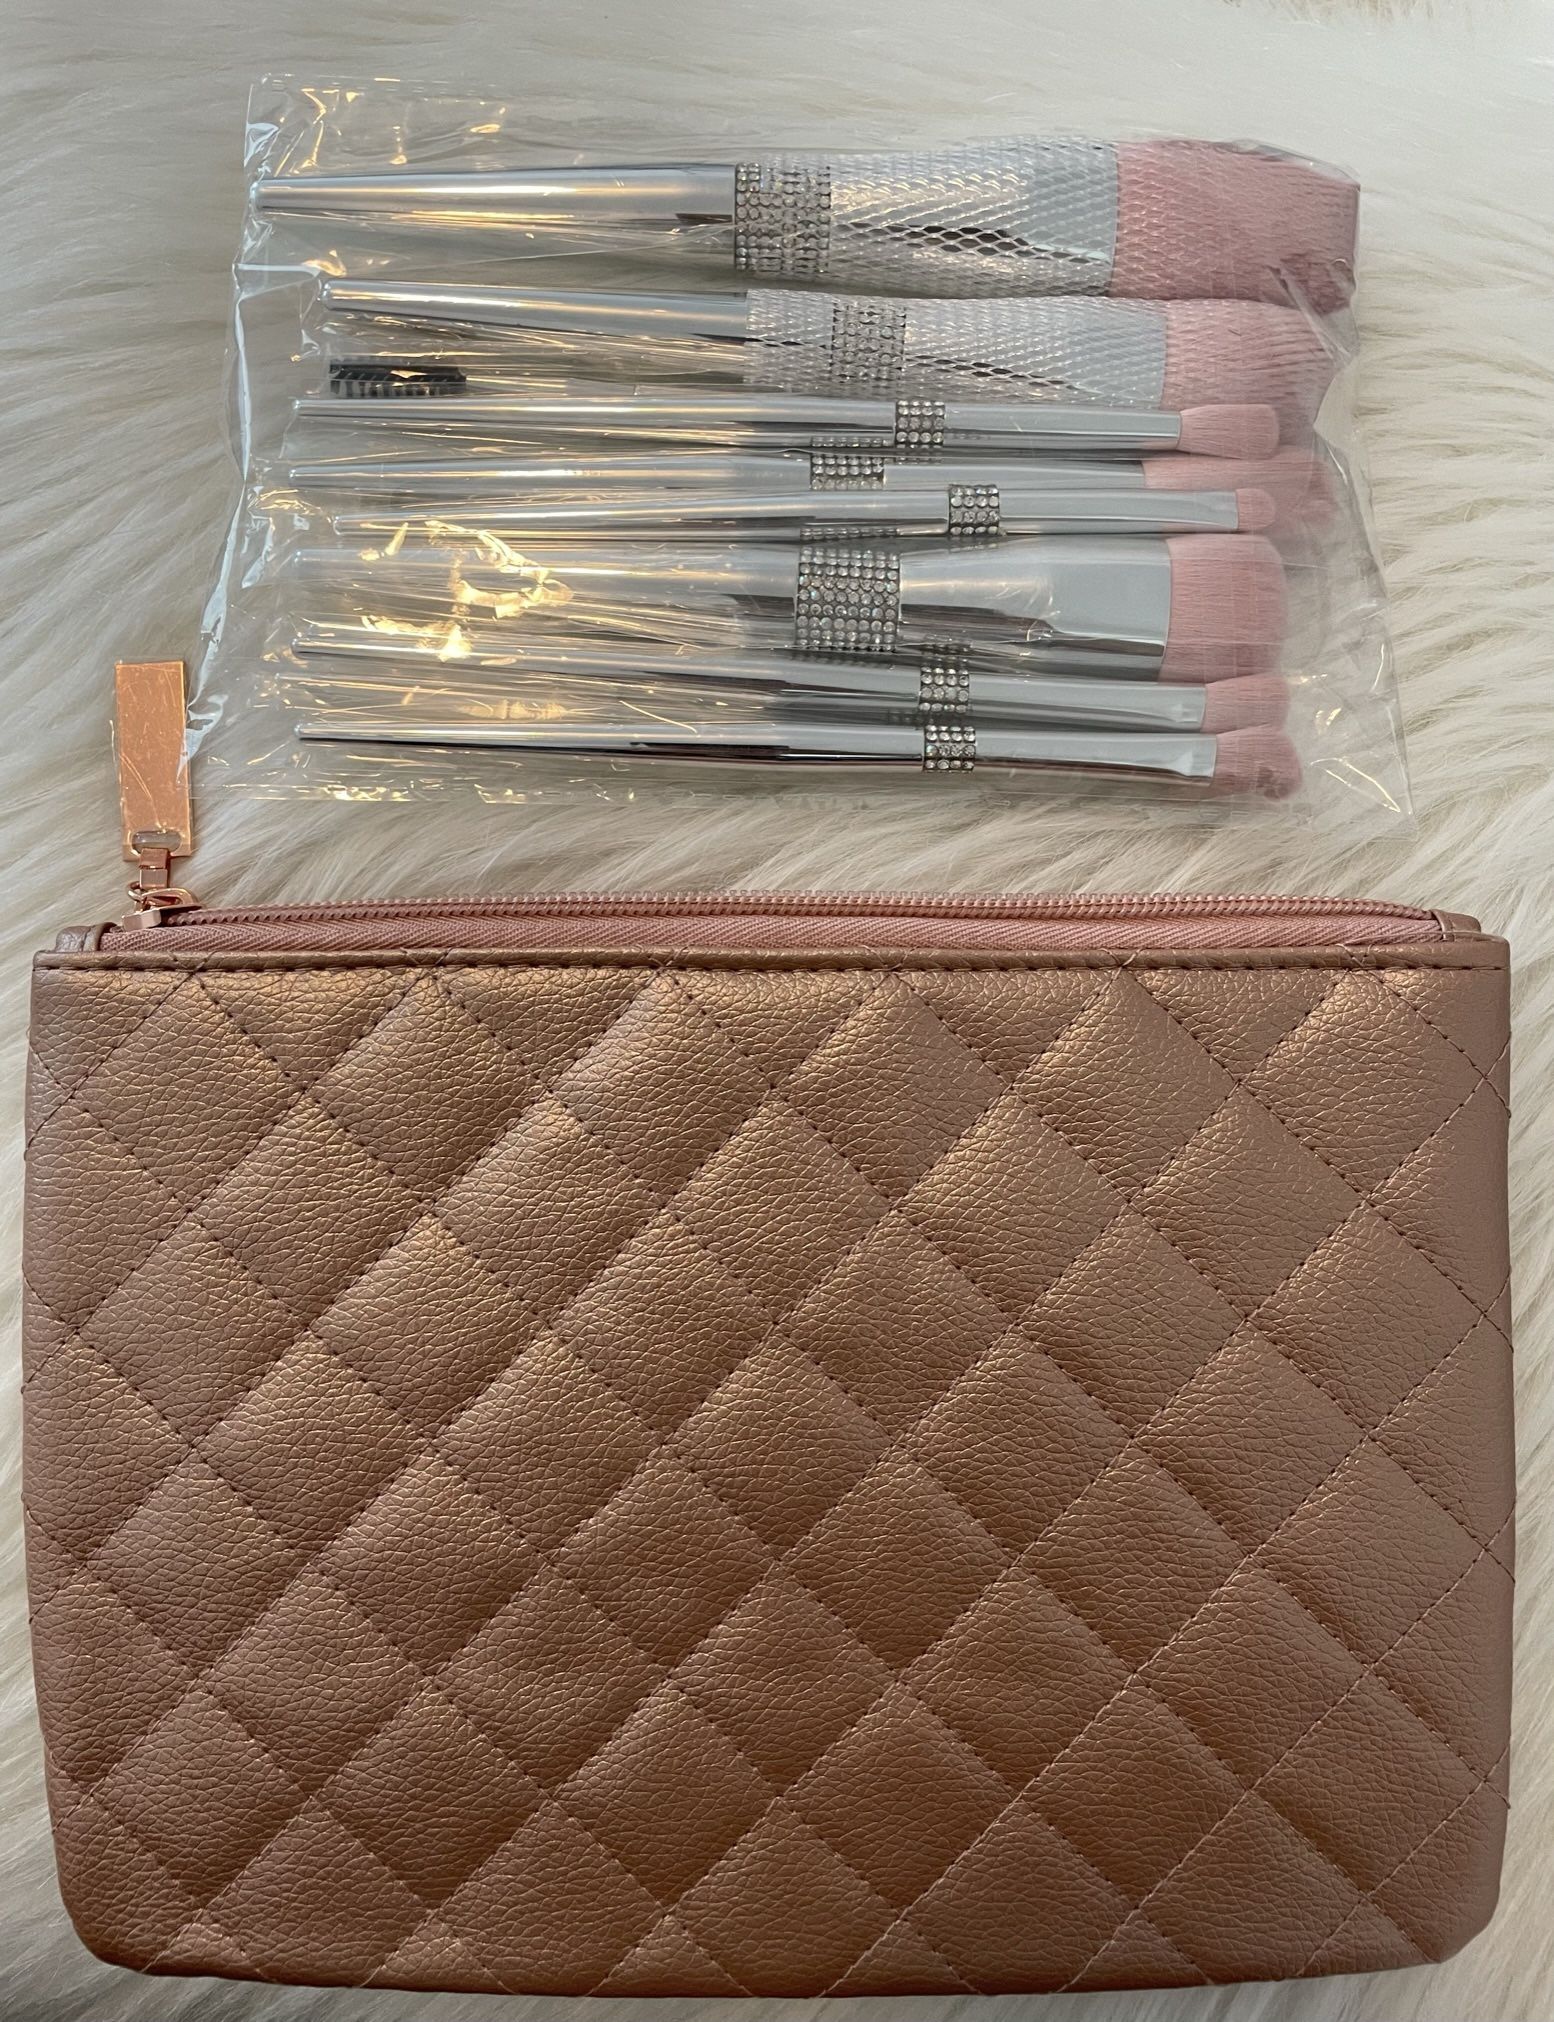 Brand New Makeup Brushes 